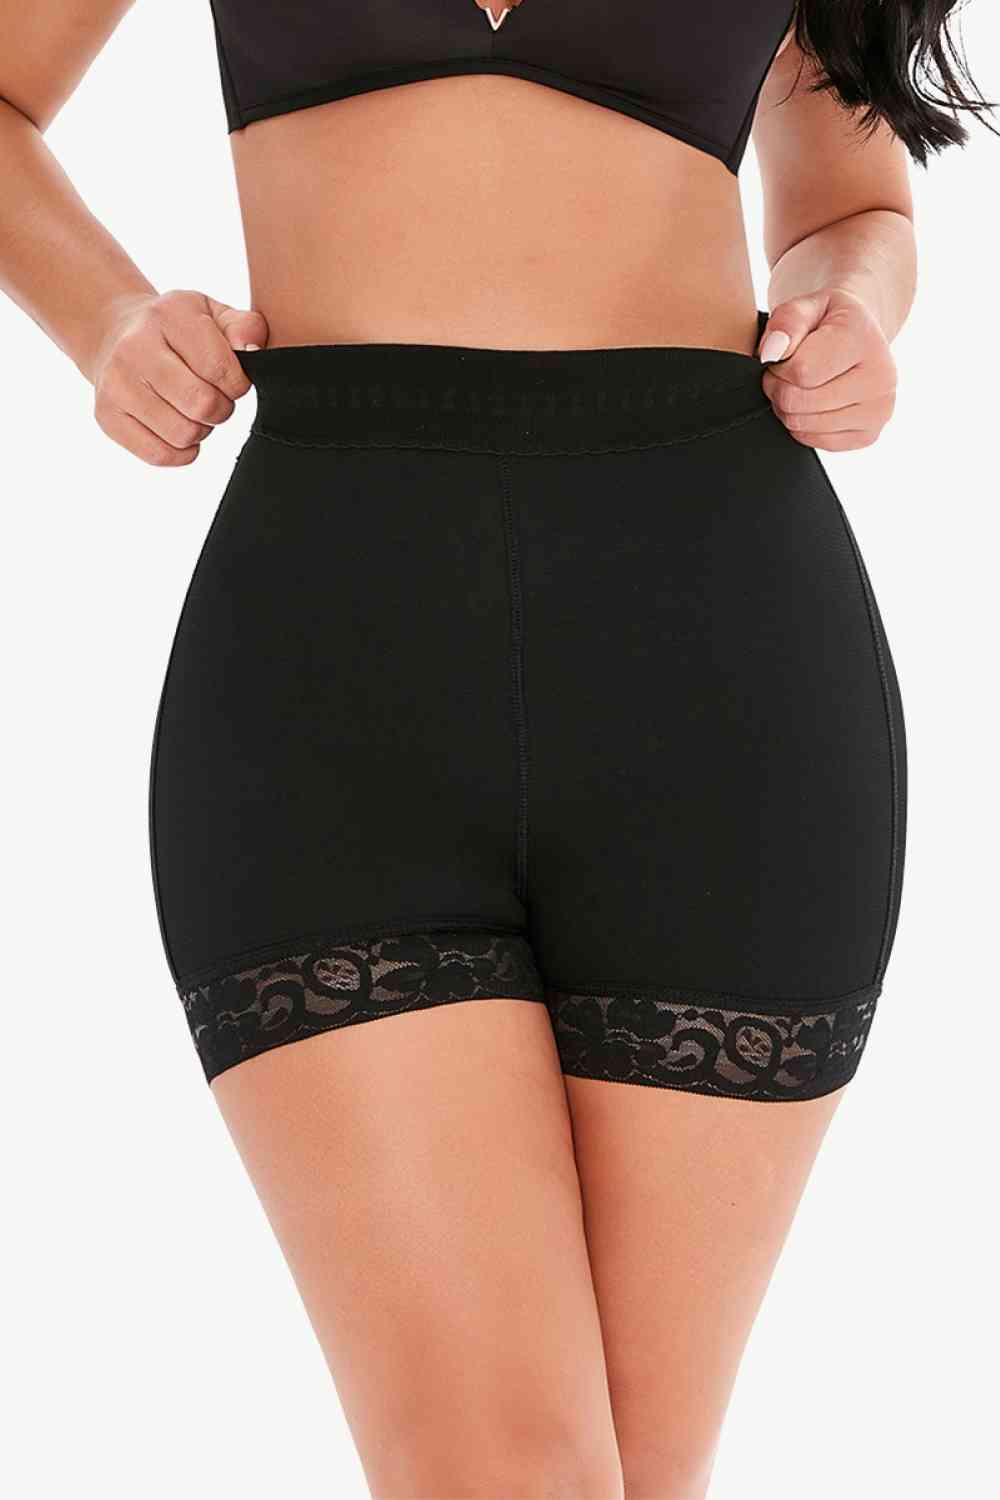 Full Size Pull-On Lace Trim Shaping Shorts